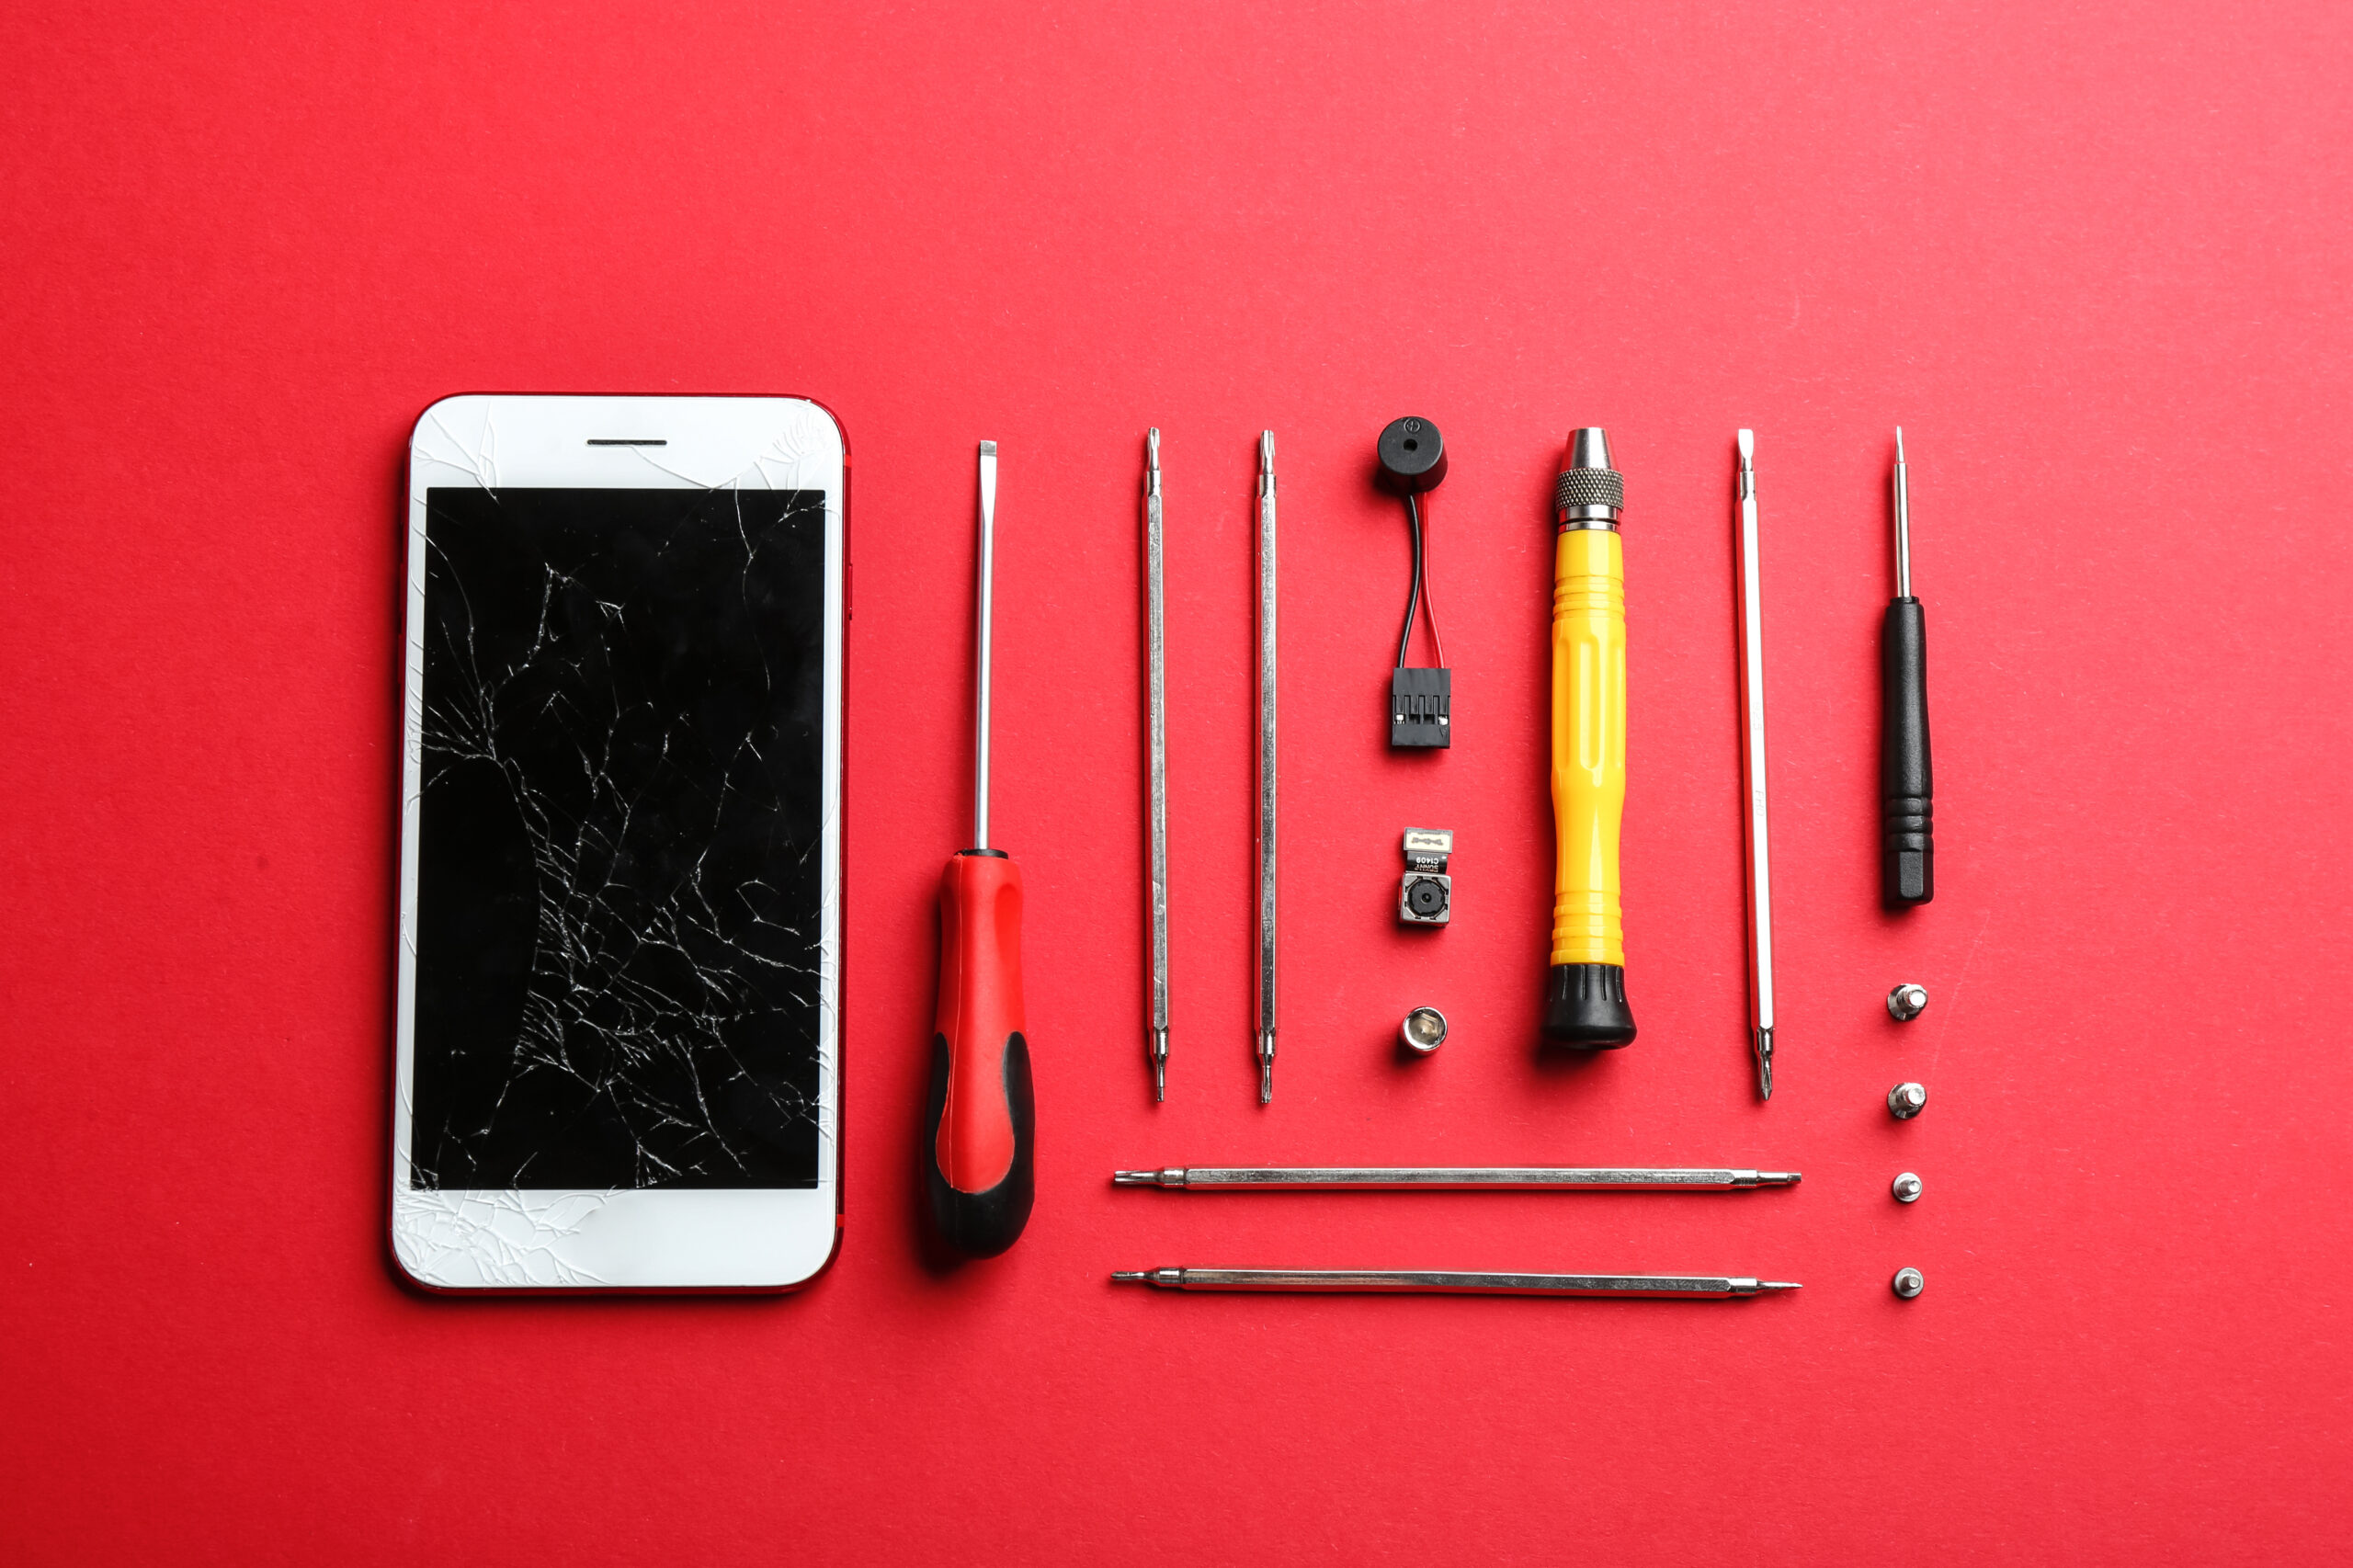 Market And Attract Customers for Phone Repair